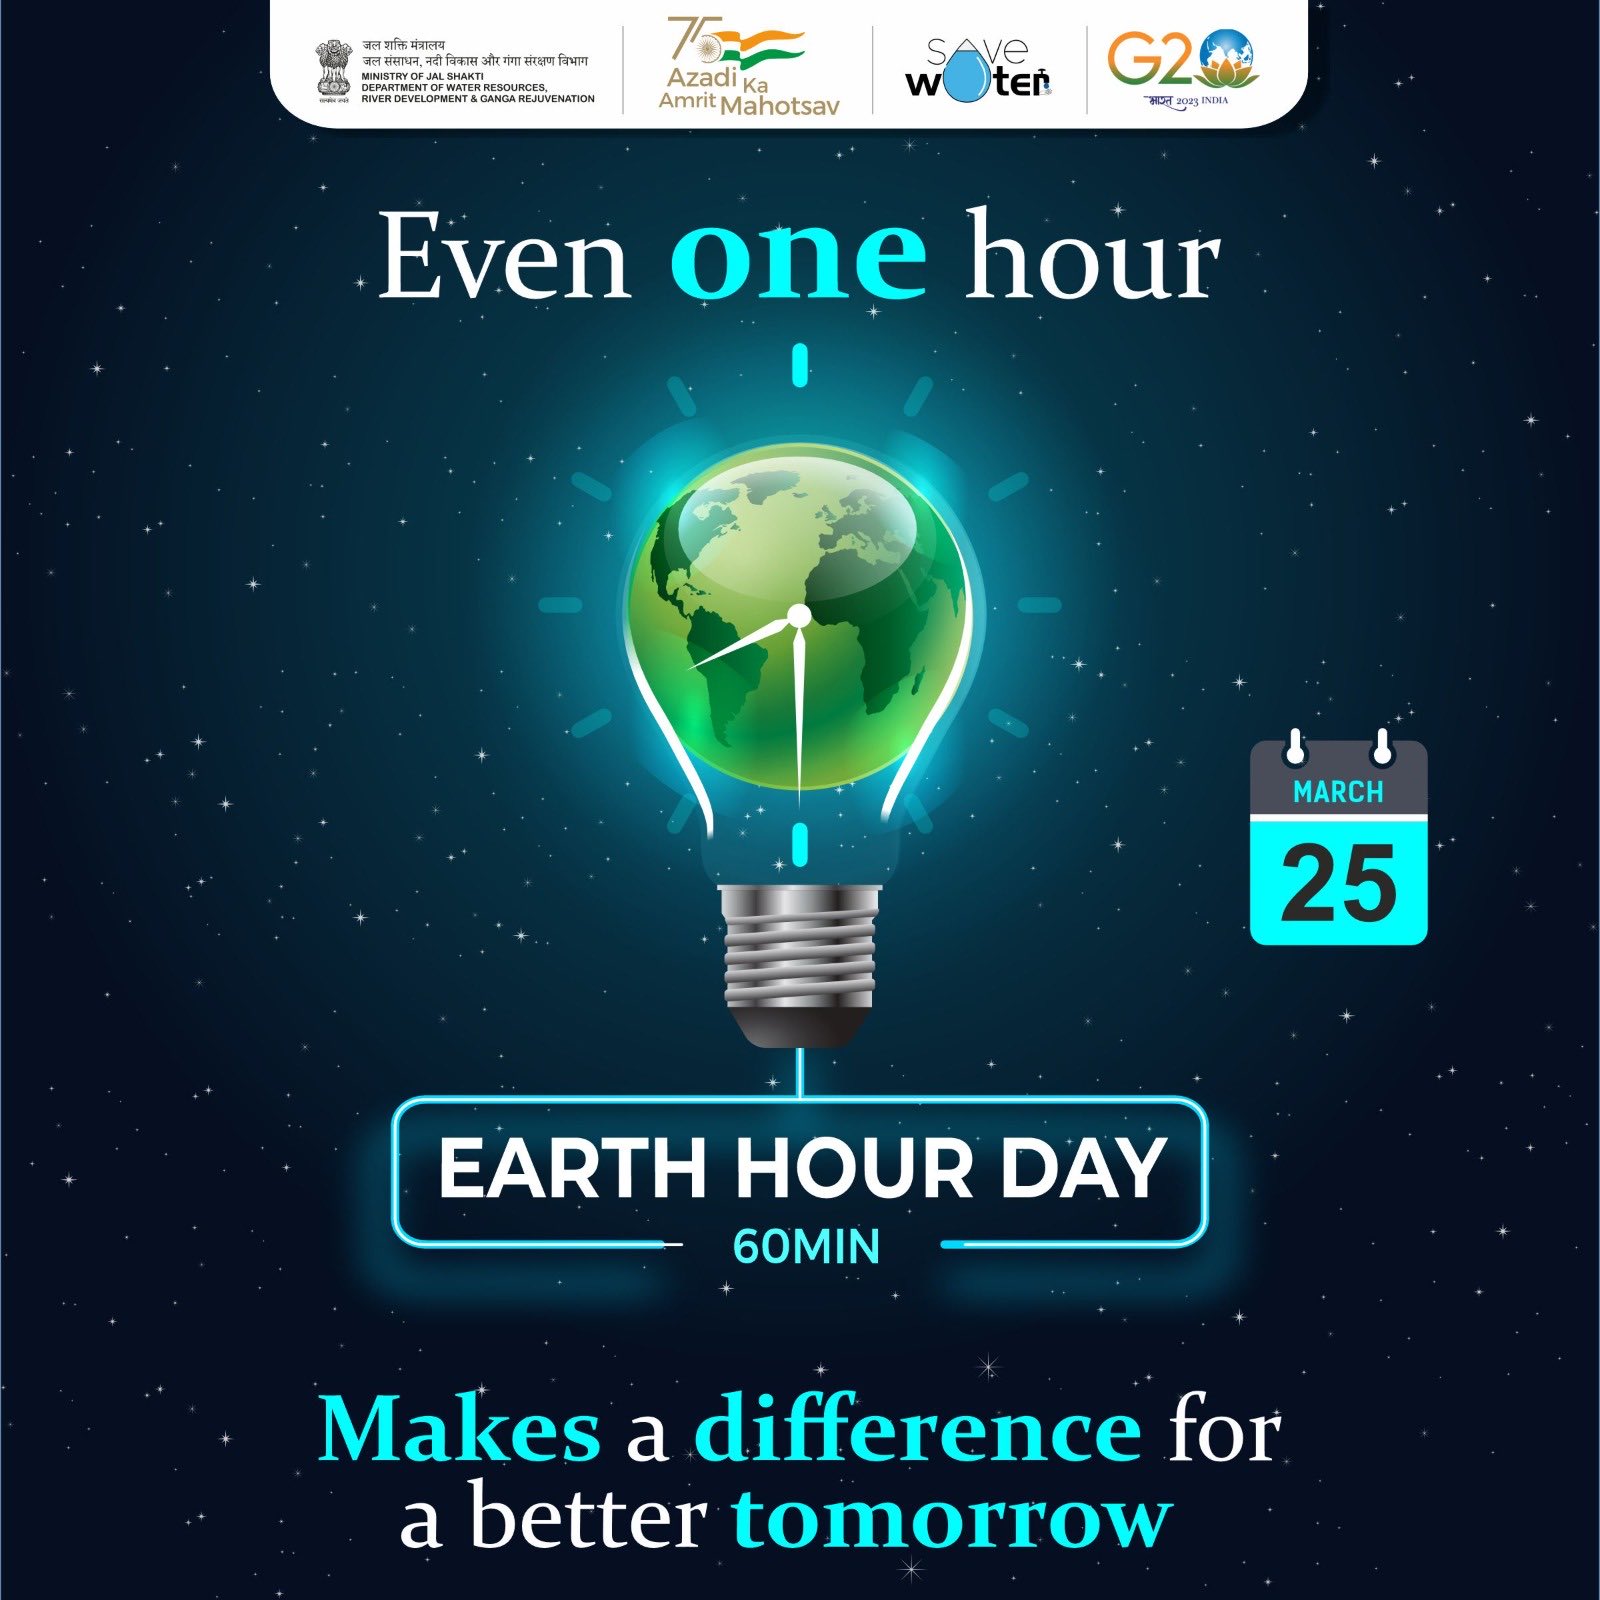 Kriger vand Snestorm Ministry of Jal Shakti 🇮🇳 #AmritMahotsav on X: "It's time to dim the  lights and brighten the future! This Earth Hour Day, let's join forces to  create a brighter, cleaner planet. Let's